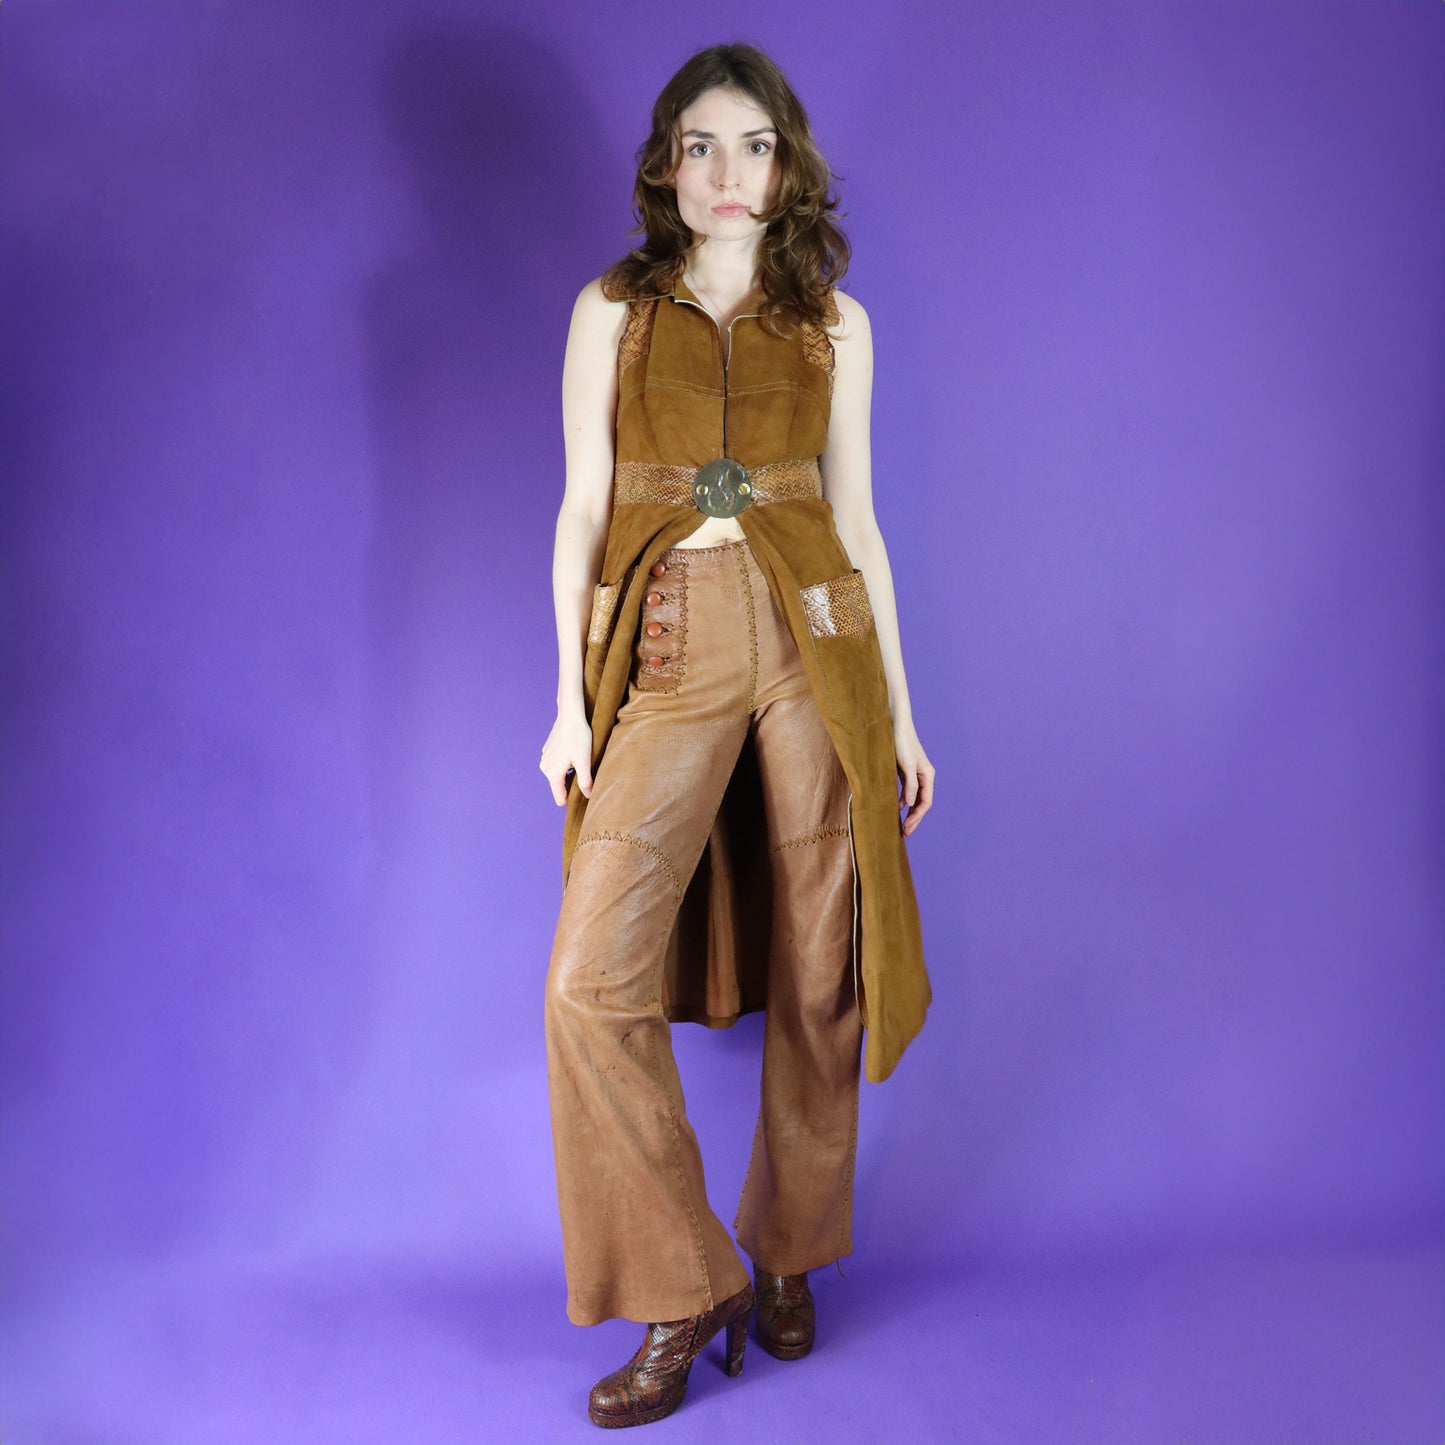 Vintage 1970s North Beach Leather Camel Whipstitch Flares